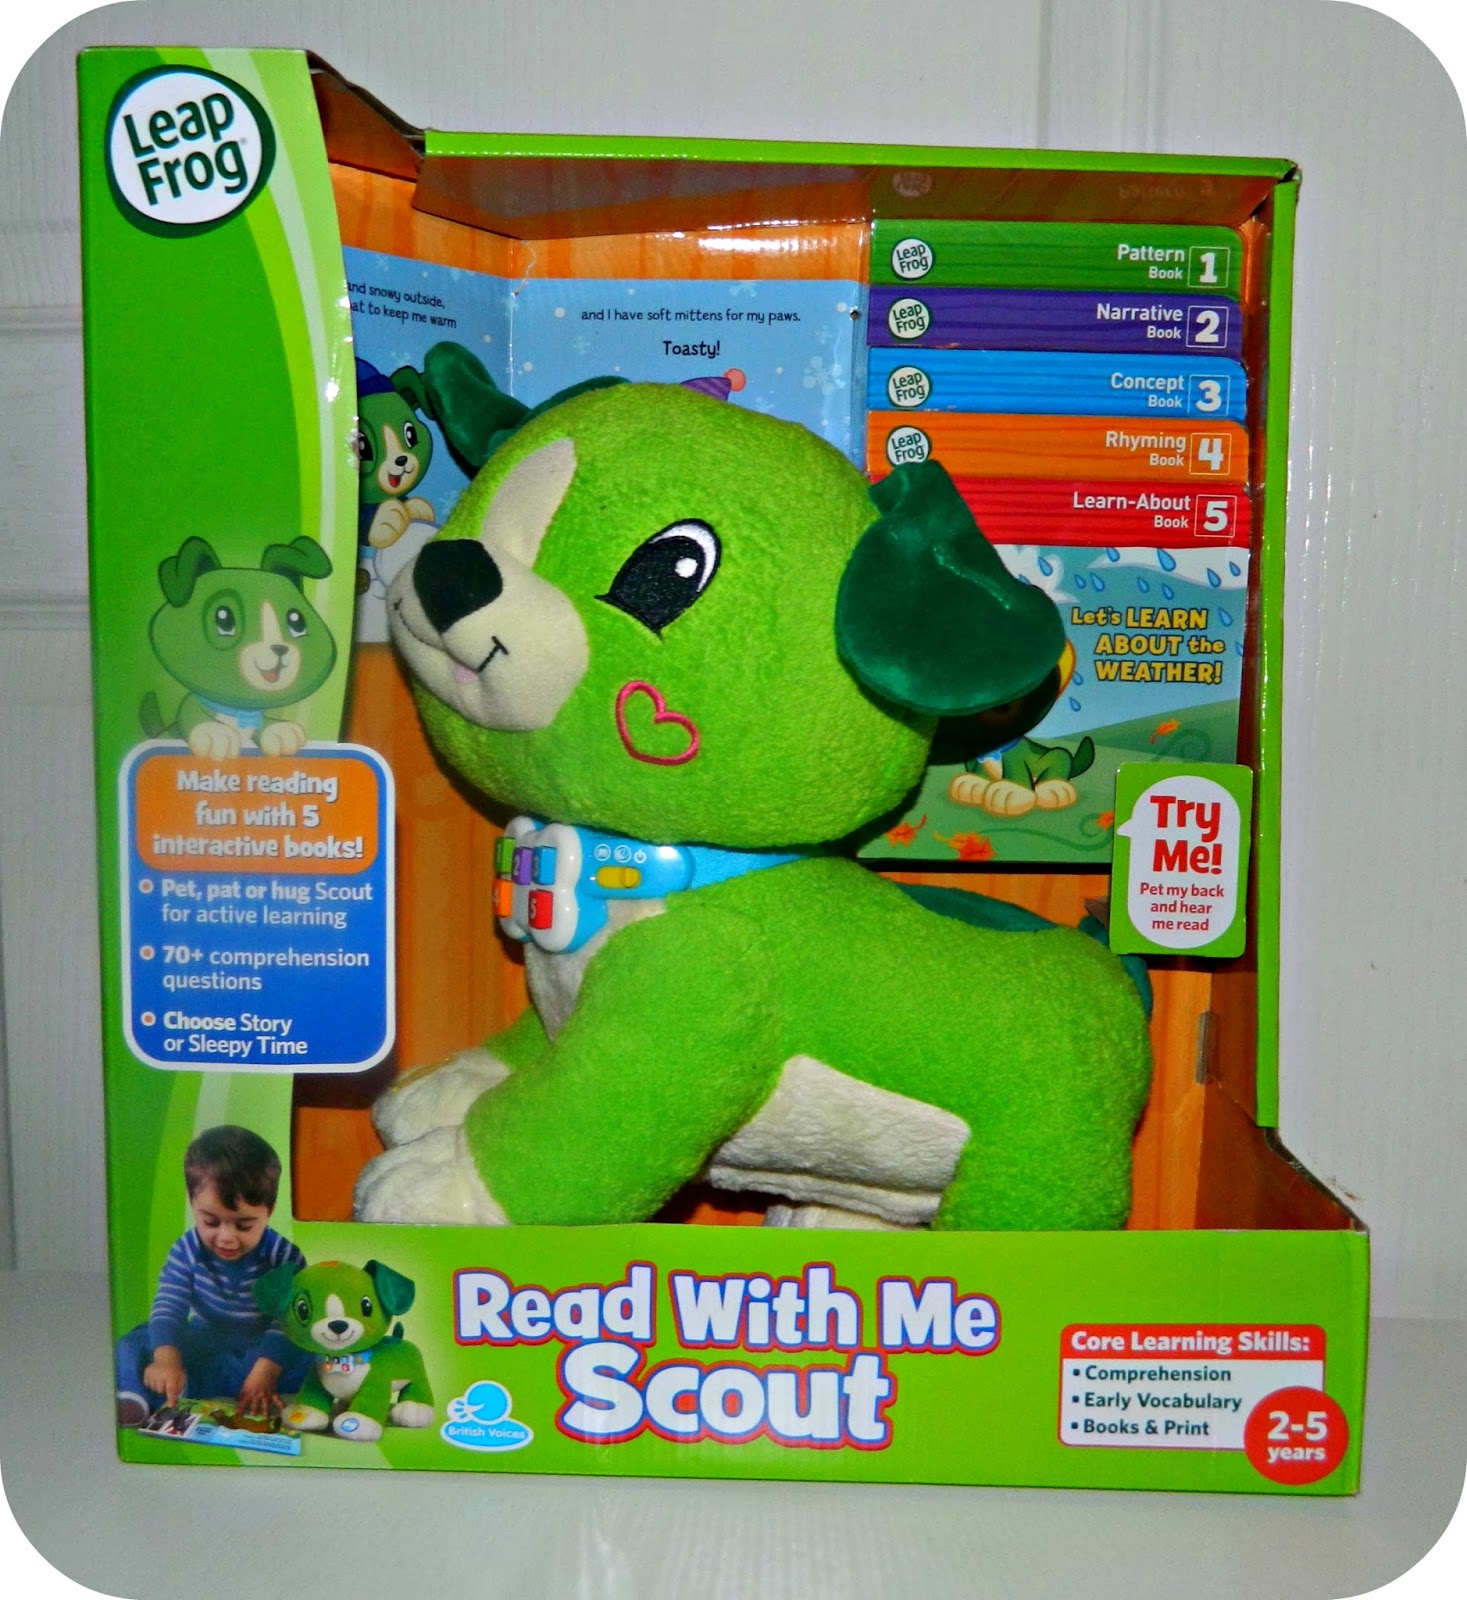 Read with Me Scout from LeapFrog